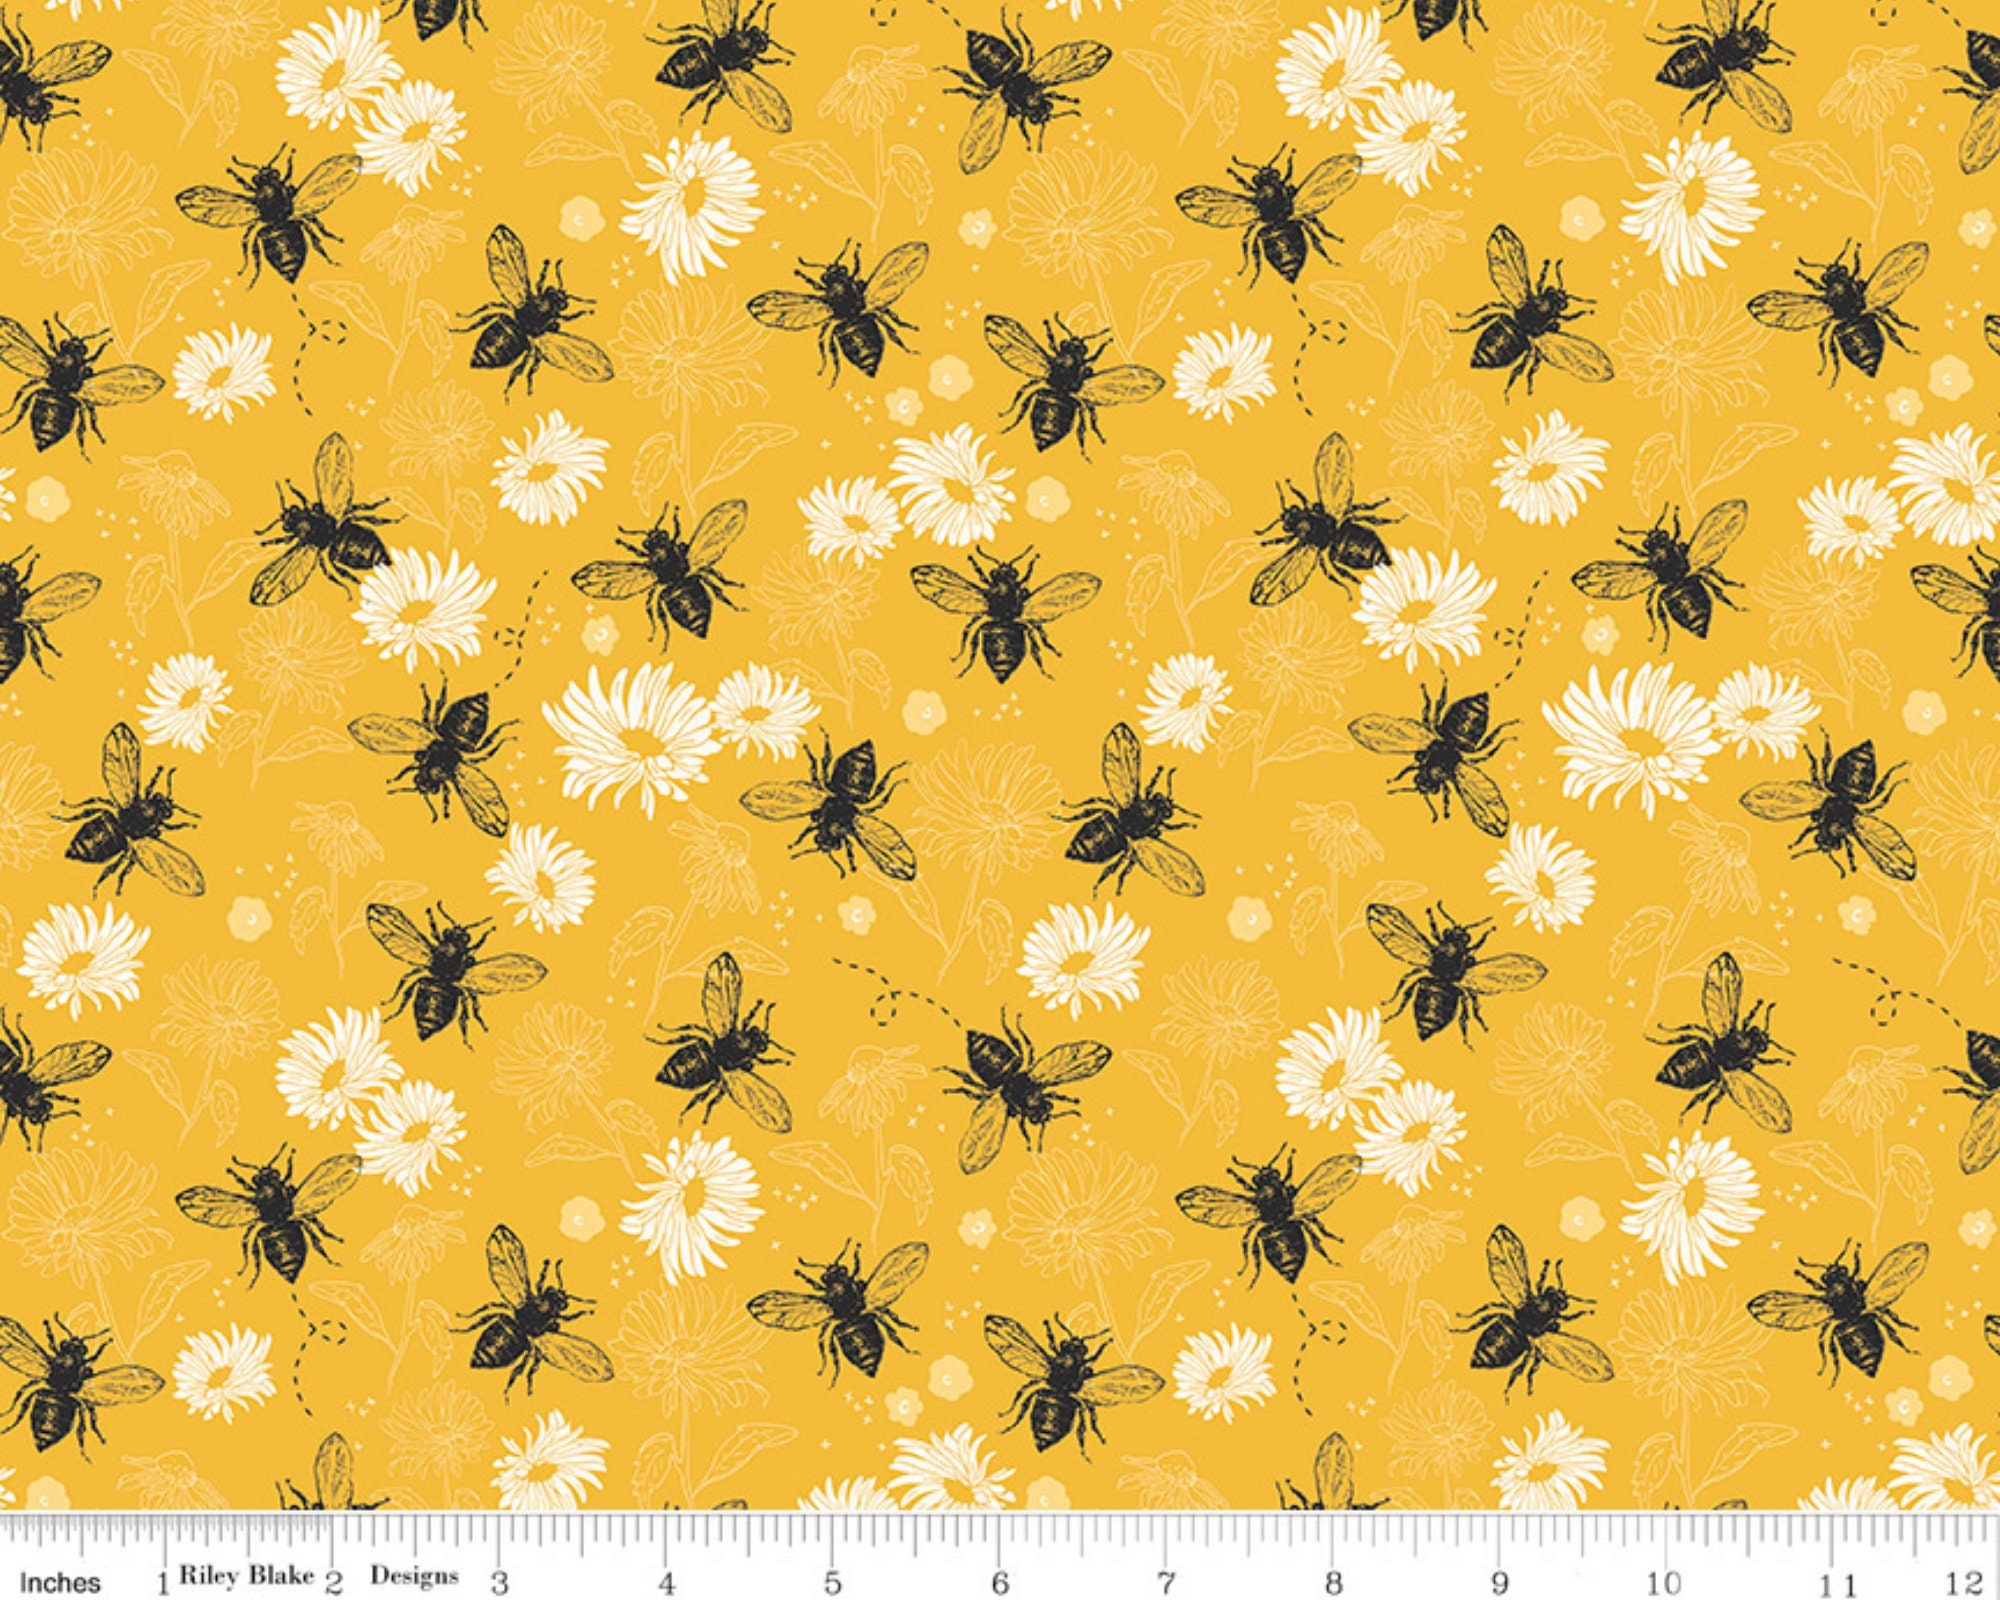 Beehive Floral Fabric, Bumble Bee Honey, Fabric by the Yard, Fat Quarter,  Quilting Fabric, Apparel Fabric, 100% Cotton Fabric, B1-34 